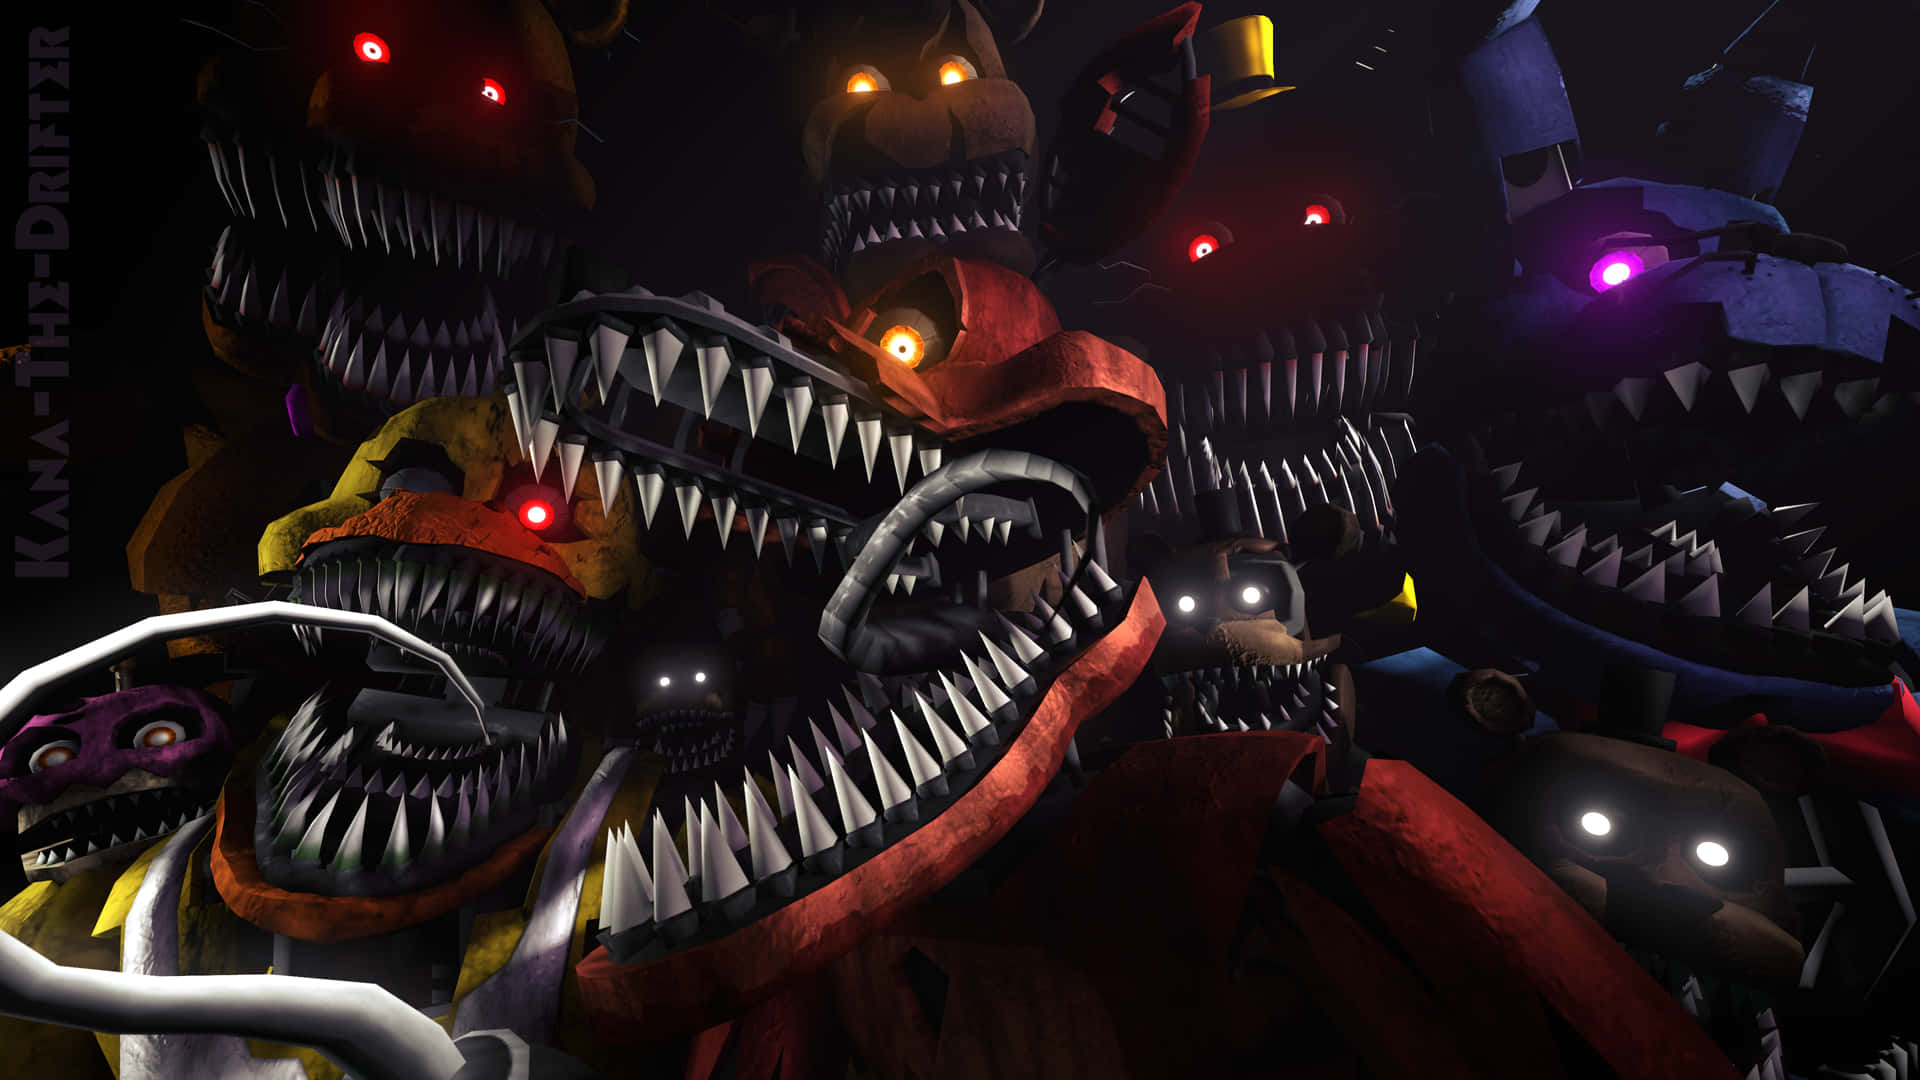 Five Nights At Freddy's 4: Halloween Edition